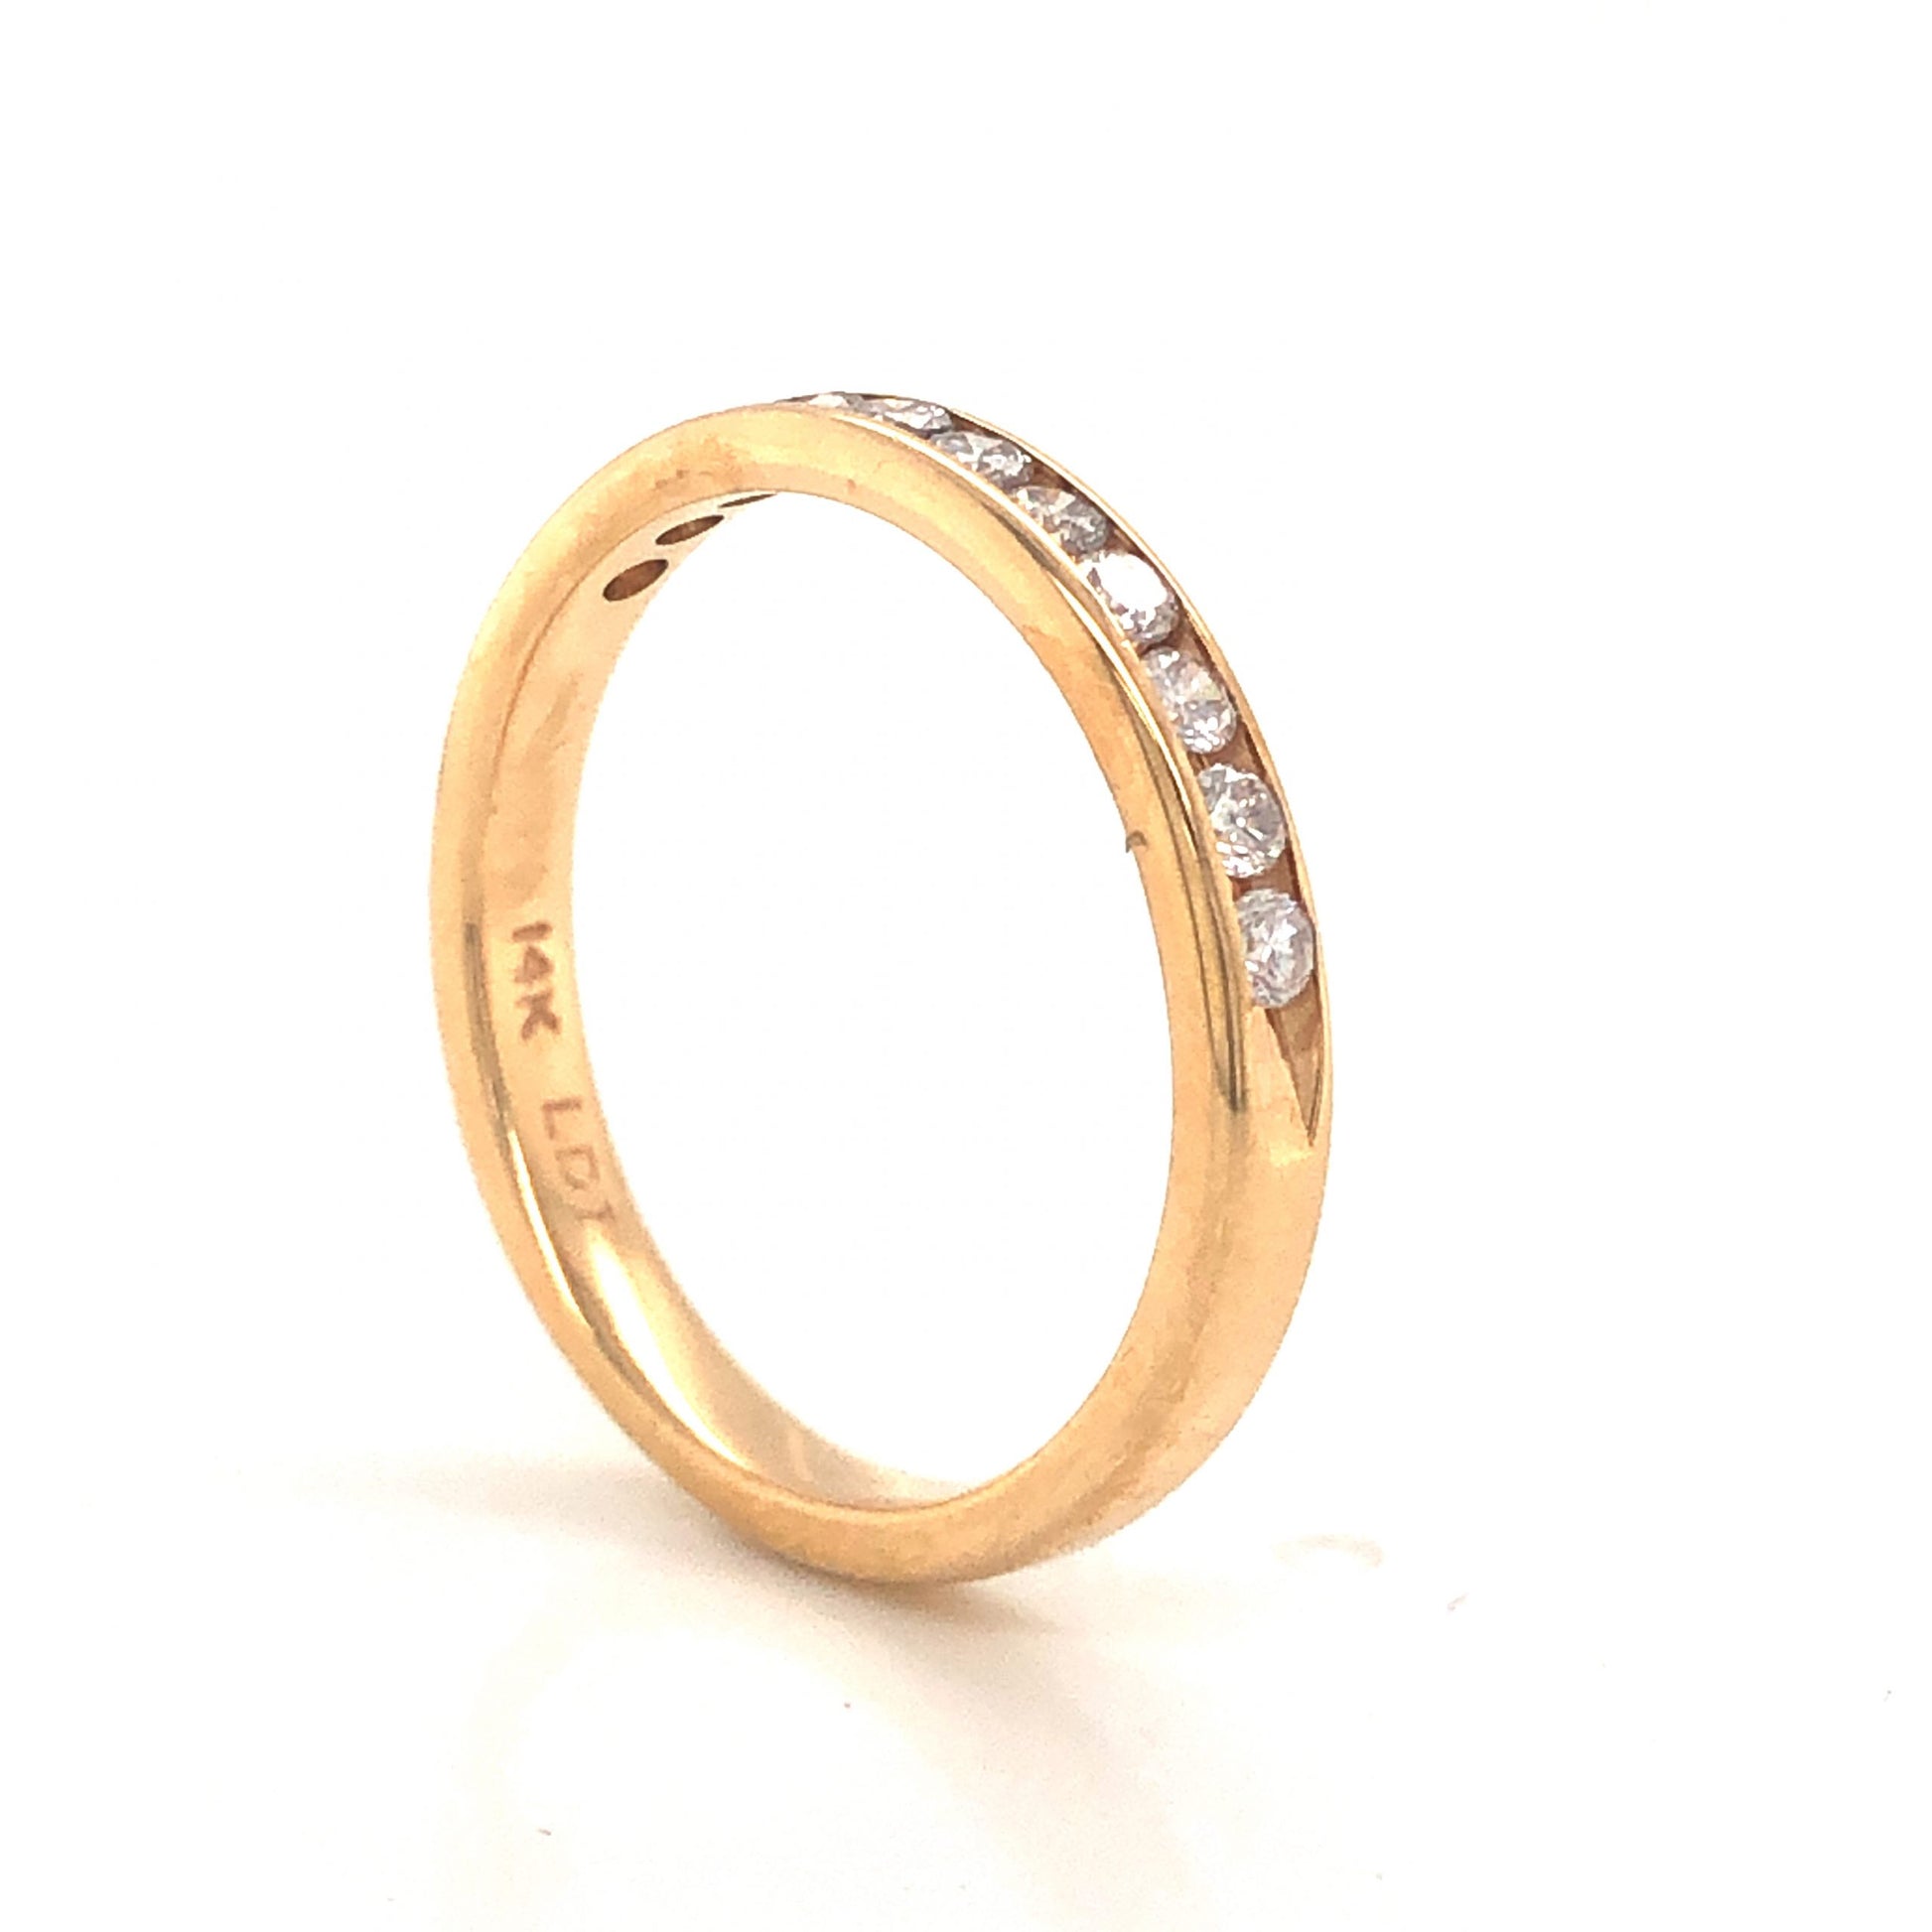 .33 Channel Set Diamond Wedding Band in 14k Yellow GoldComposition: 14 Karat Yellow Gold Ring Size: 7 Total Diamond Weight: .33ct Total Gram Weight: 2.2 g Inscription: 14k LDT
      